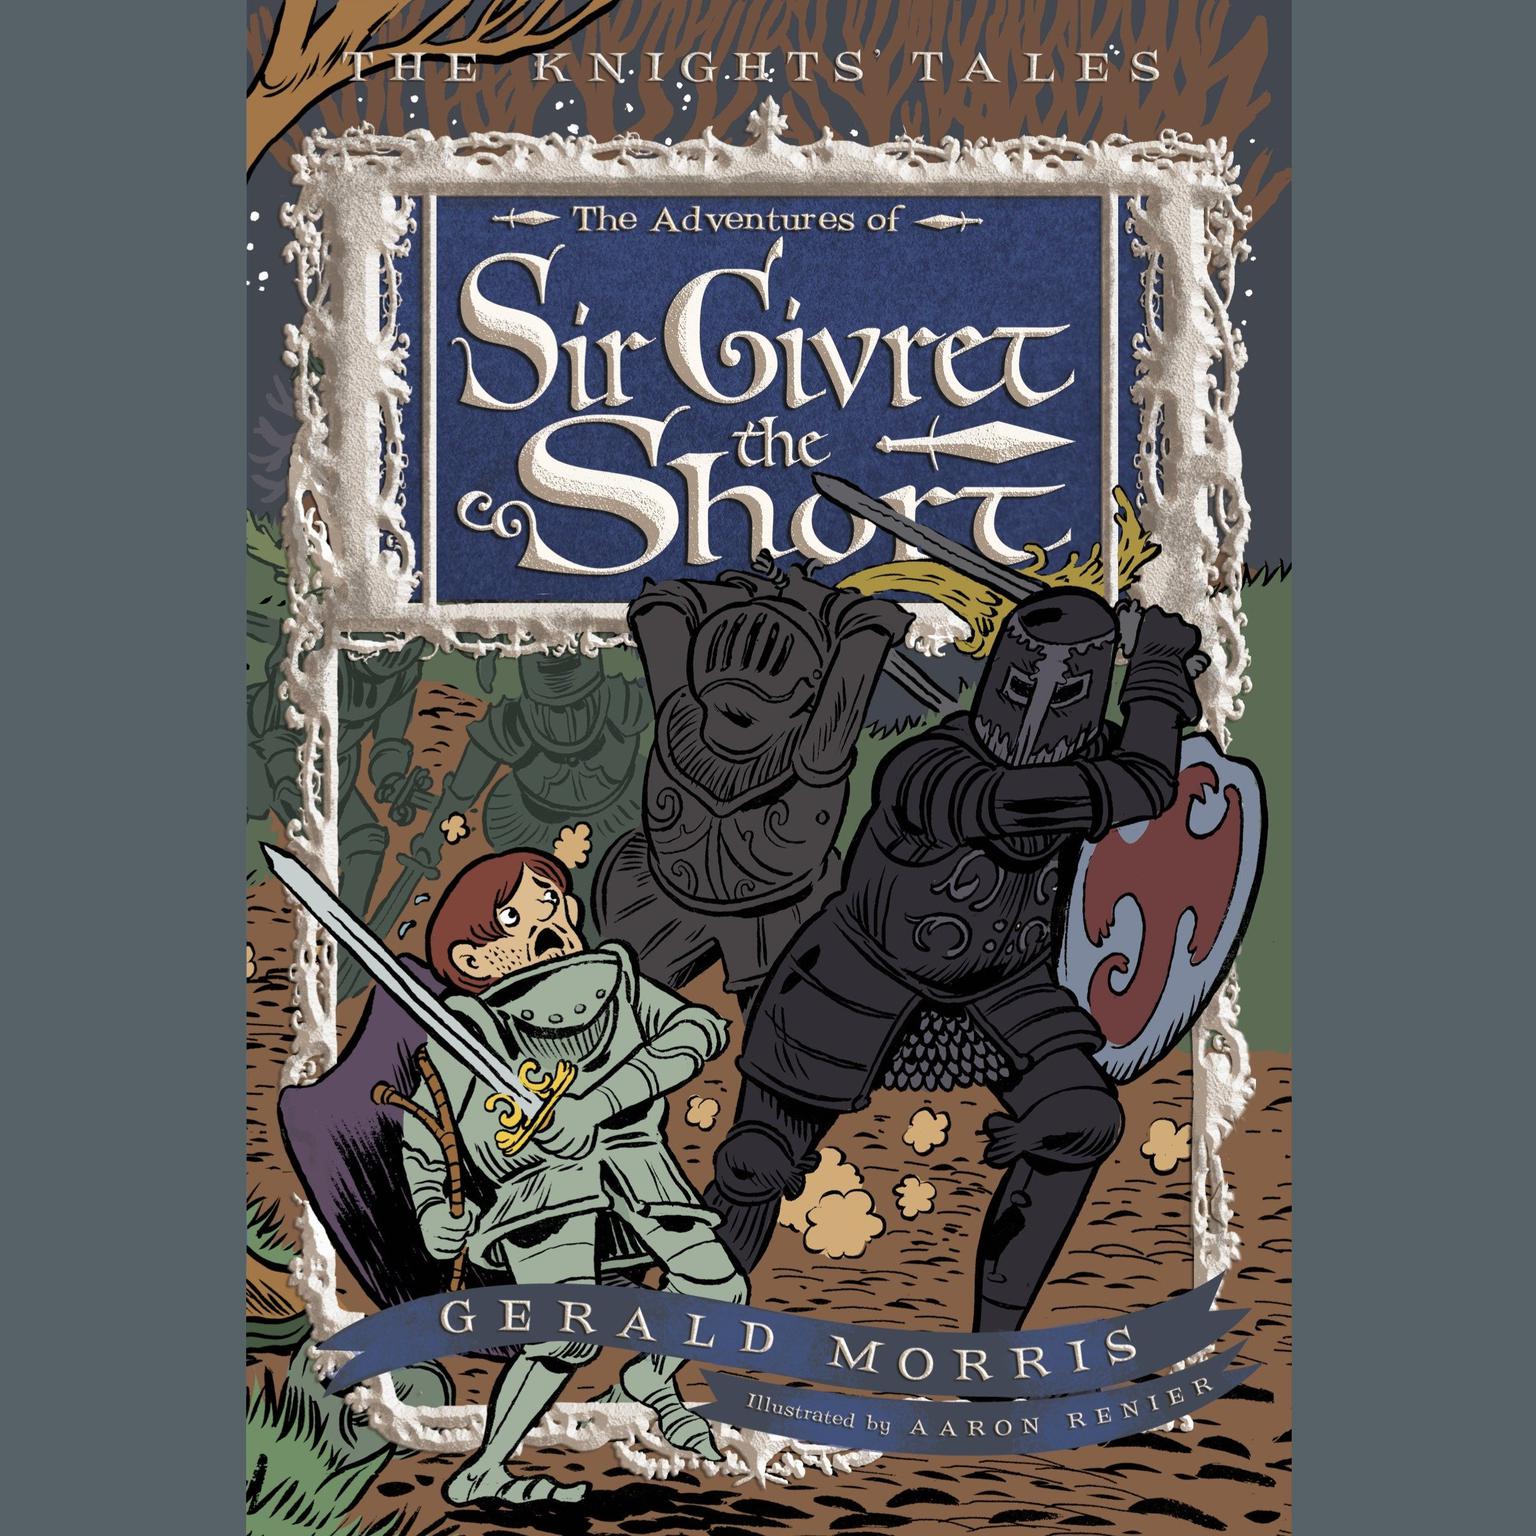 The Adventures of Sir Givret the Short: The Knights Tales Book 2 Audiobook, by Gerald Morris